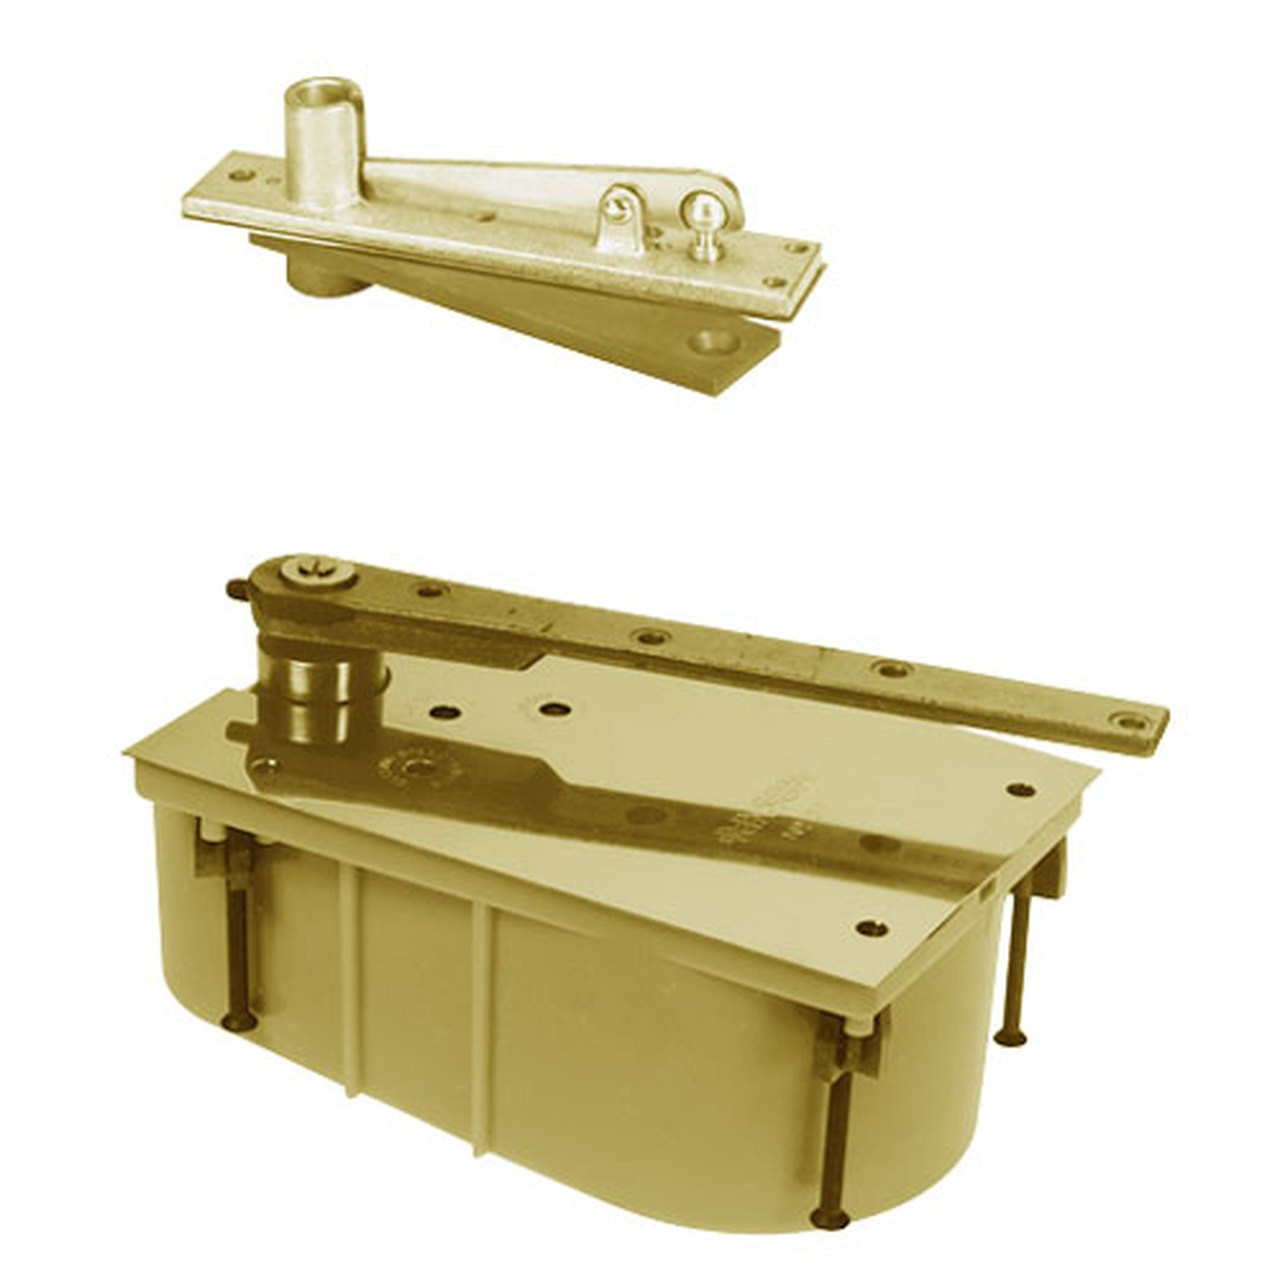 28-90N-554-LFP-LCC-RH-606 Rixson 28 Series Heavy Duty Single Acting Center Hung Floor Closer with Concealed Arm in Satin Brass Finish